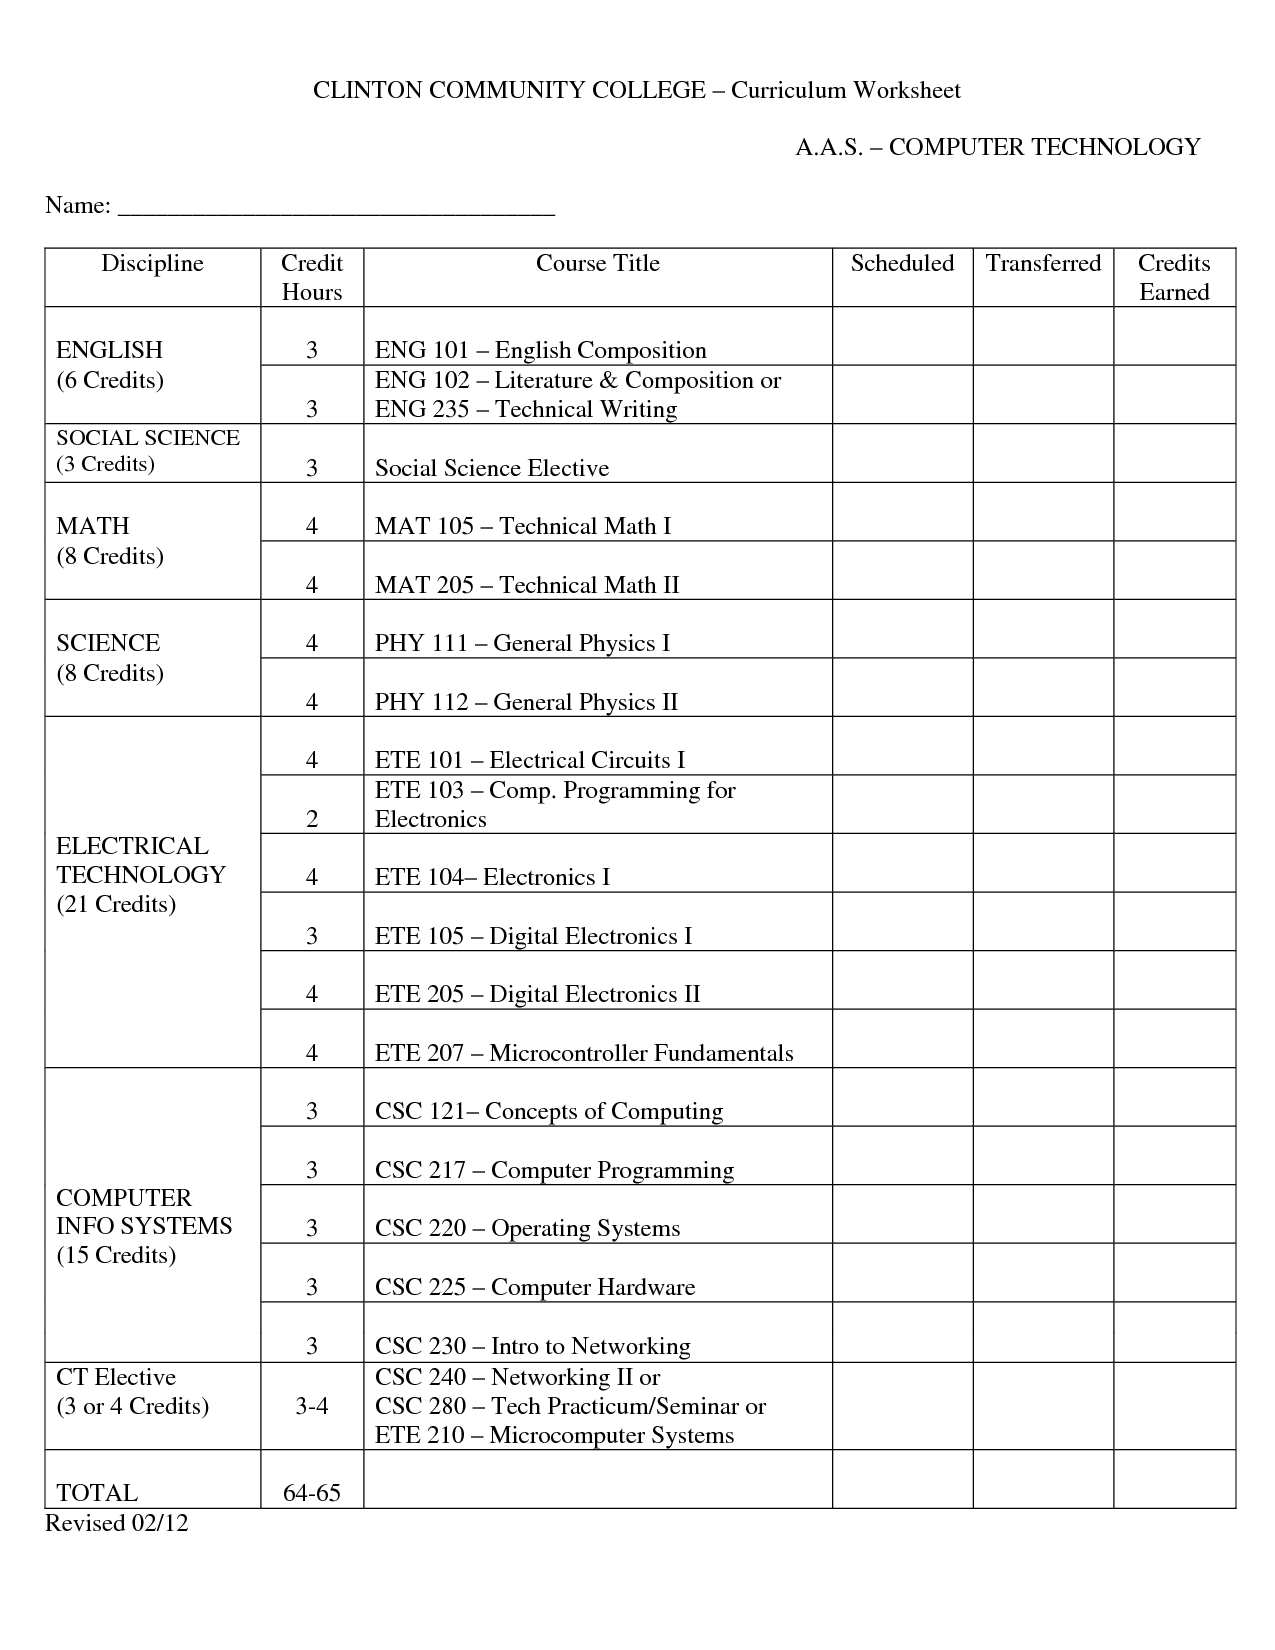 College Curriculum Worksheets Image